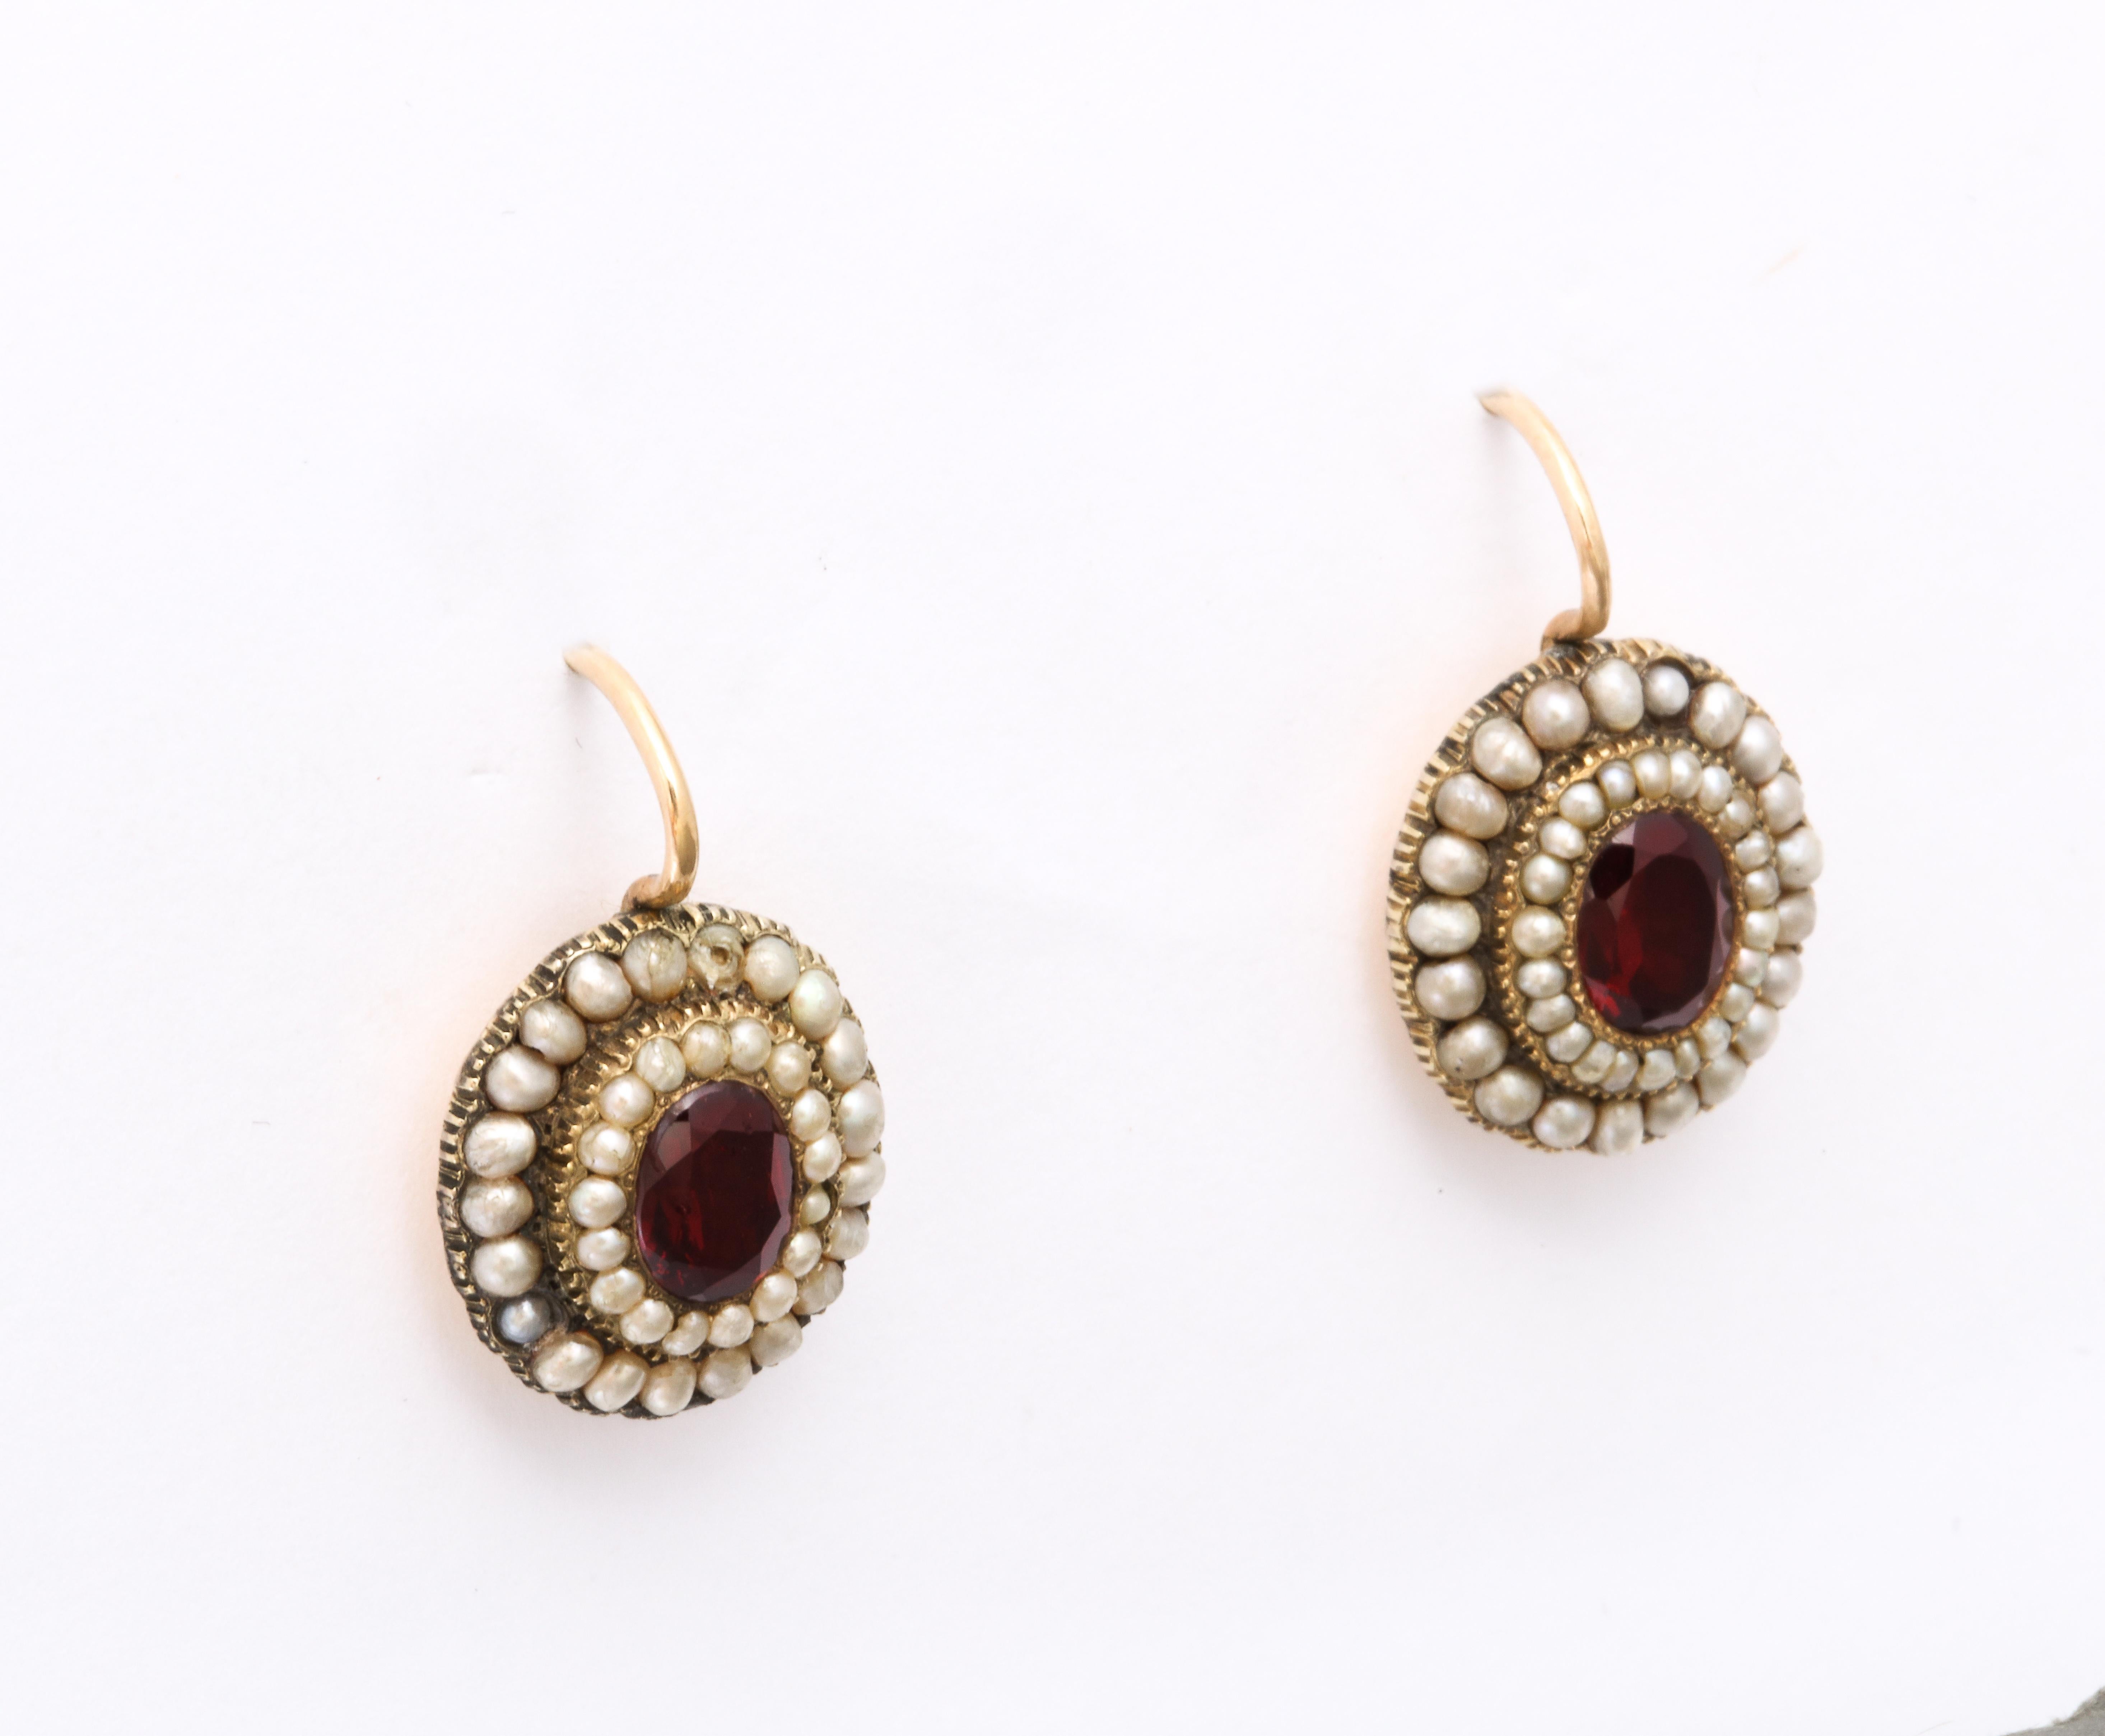 Earrings this size, shape and condition in high karat gold with natural pearls and garnets, are an every day, every occasion accessory of jewelry history. The gold is 15 Kt to 18Kt. Each garnet, Burgundy red, 1.50 cts each, is set in a foiled back